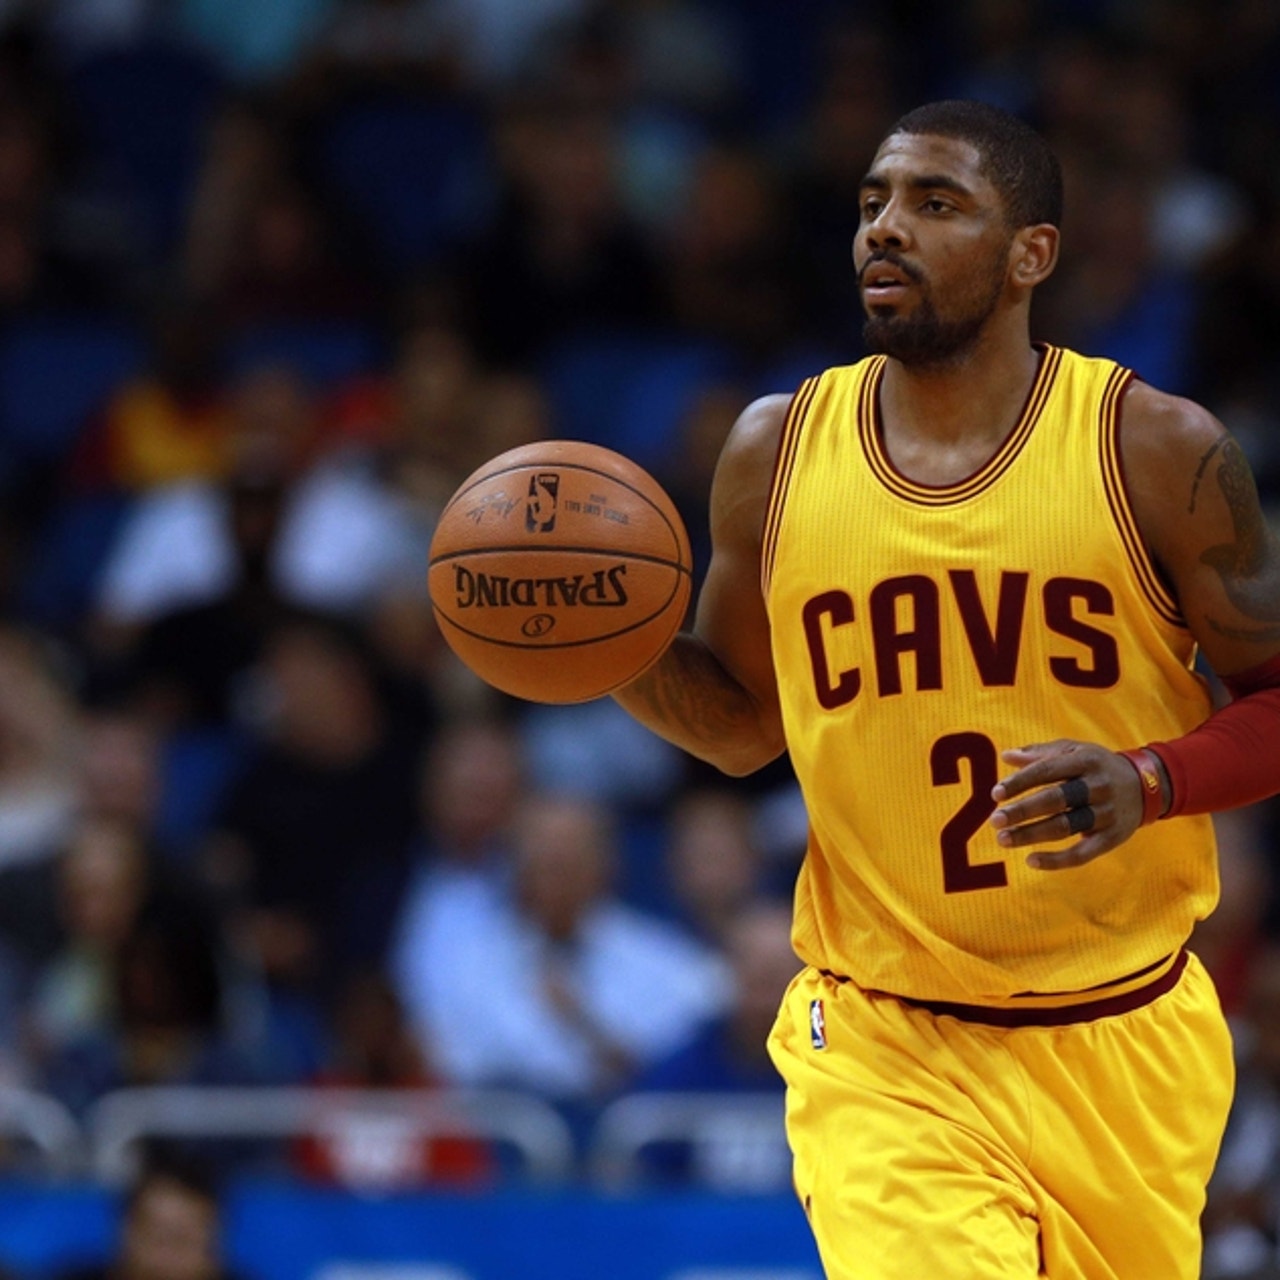 Cleveland Cavaliers' Kyrie Irving makes his way down the court